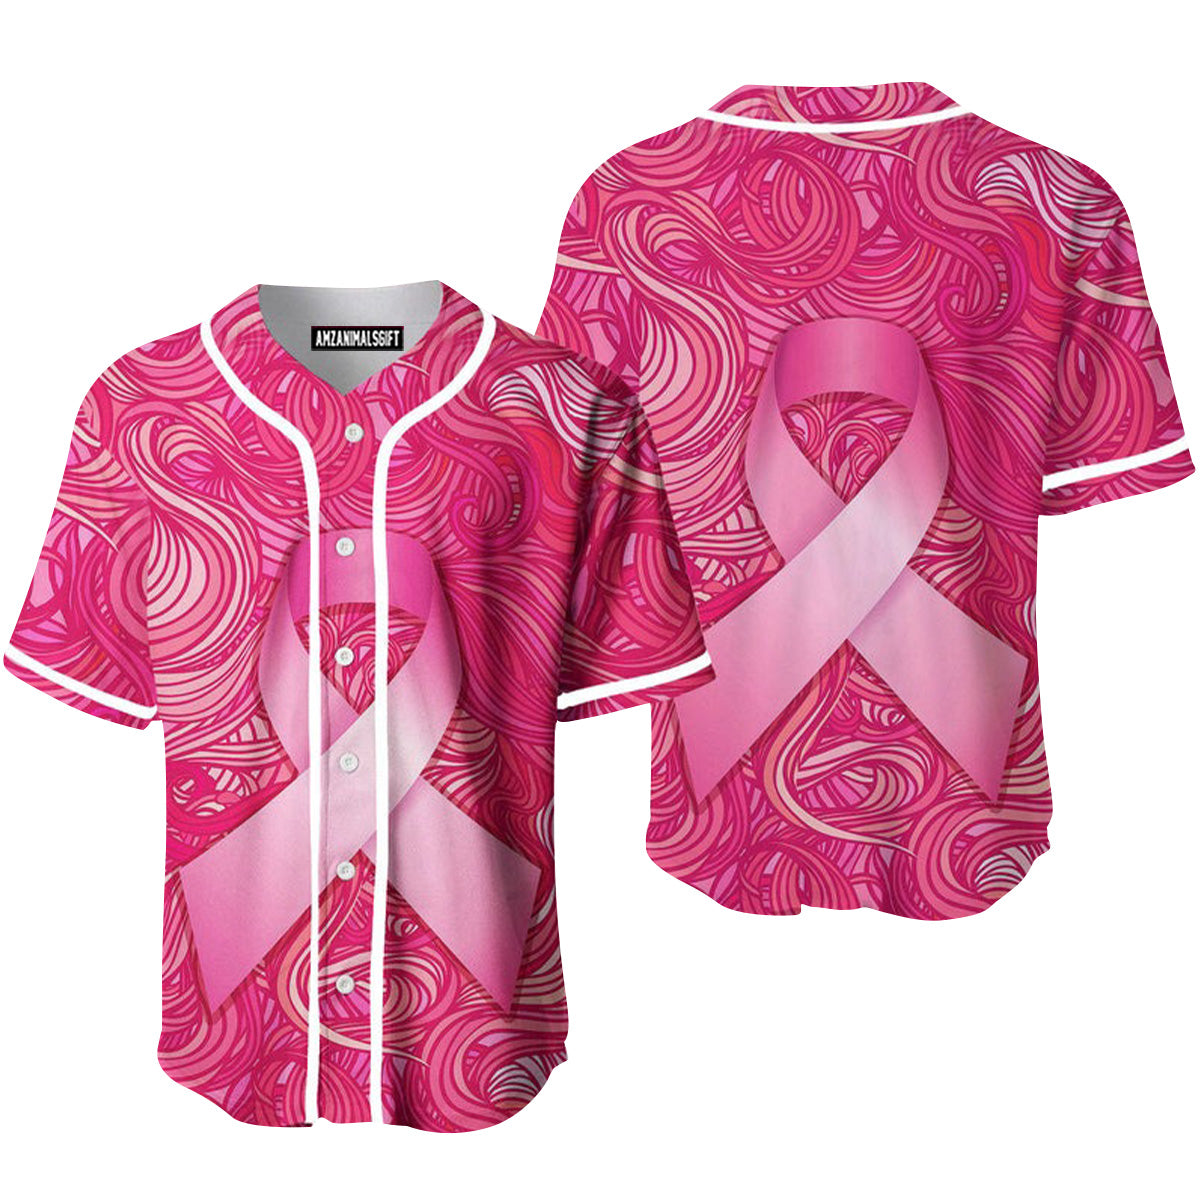 Breast Cancer Iconic Pink Ribbon Baseball Jersey, Perfect Outfit For Men And Women On Breast Cancer Survivors Baseball Team Baseball Fans